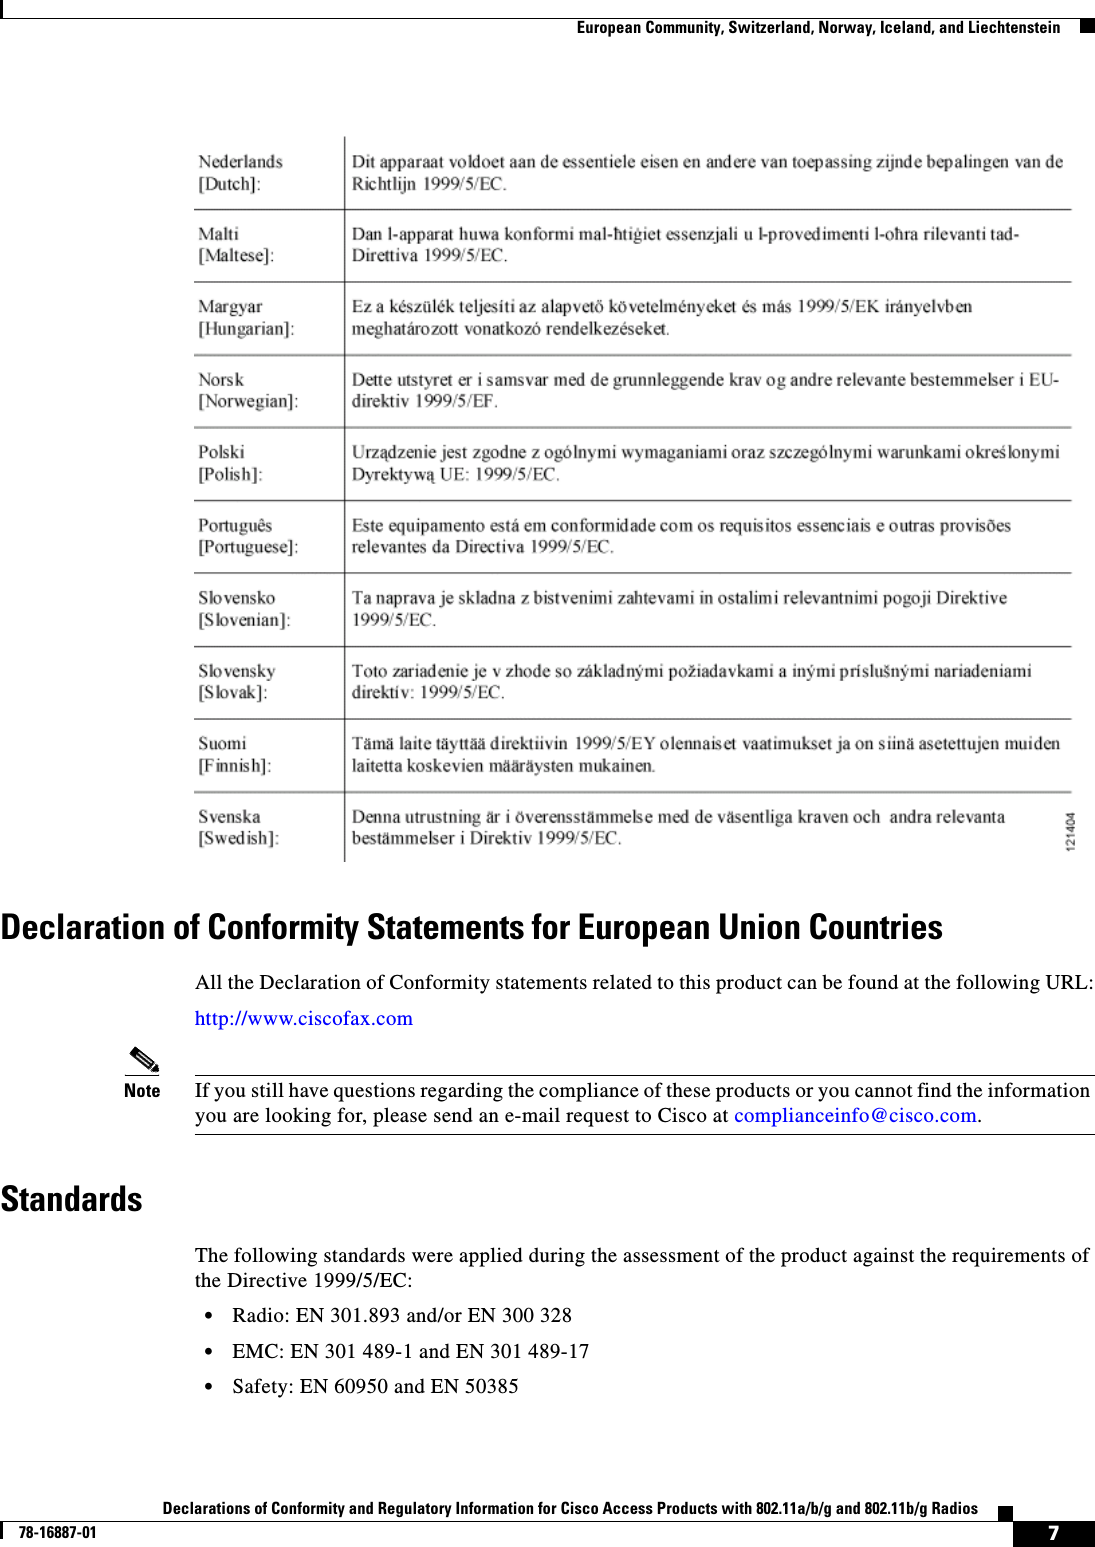  7Declarations of Conformity and Regulatory Information for Cisco Access Products with 802.11a/b/g and 802.11b/g Radios78-16887-01   European Community, Switzerland, Norway, Iceland, and LiechtensteinDeclaration of Conformity Statements for European Union CountriesAll the Declaration of Conformity statements related to this product can be found at the following URL:http://www.ciscofax.comNote If you still have questions regarding the compliance of these products or you cannot find the information you are looking for, please send an e-mail request to Cisco at complianceinfo@cisco.com.StandardsThe following standards were applied during the assessment of the product against the requirements of the Directive 1999/5/EC:•Radio: EN 301.893 and/or EN 300 328•EMC: EN 301 489-1 and EN 301 489-17•Safety: EN 60950 and EN 50385